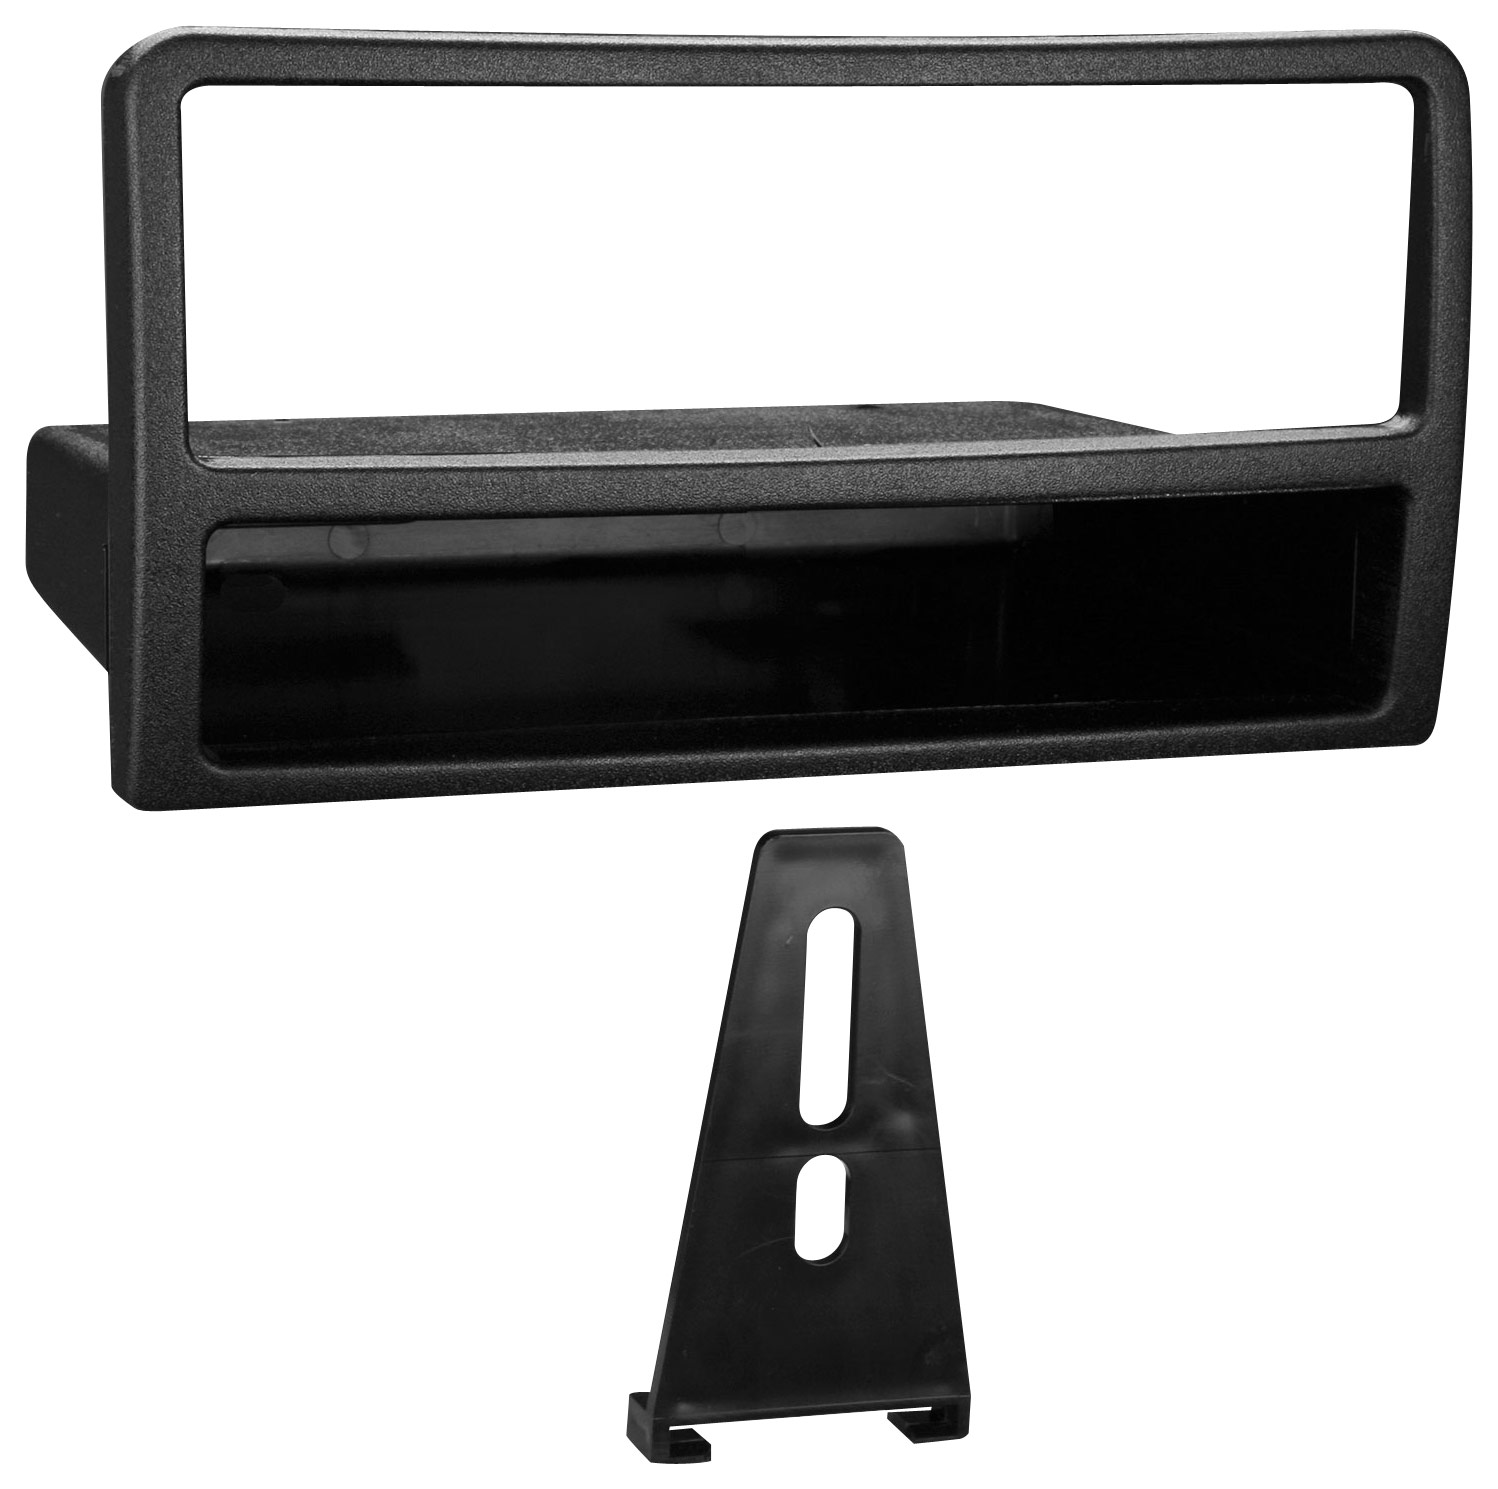 Metra - Installation Kit for Select Ford and Mercury Vehicles - Black was $16.99 now $12.74 (25.0% off)